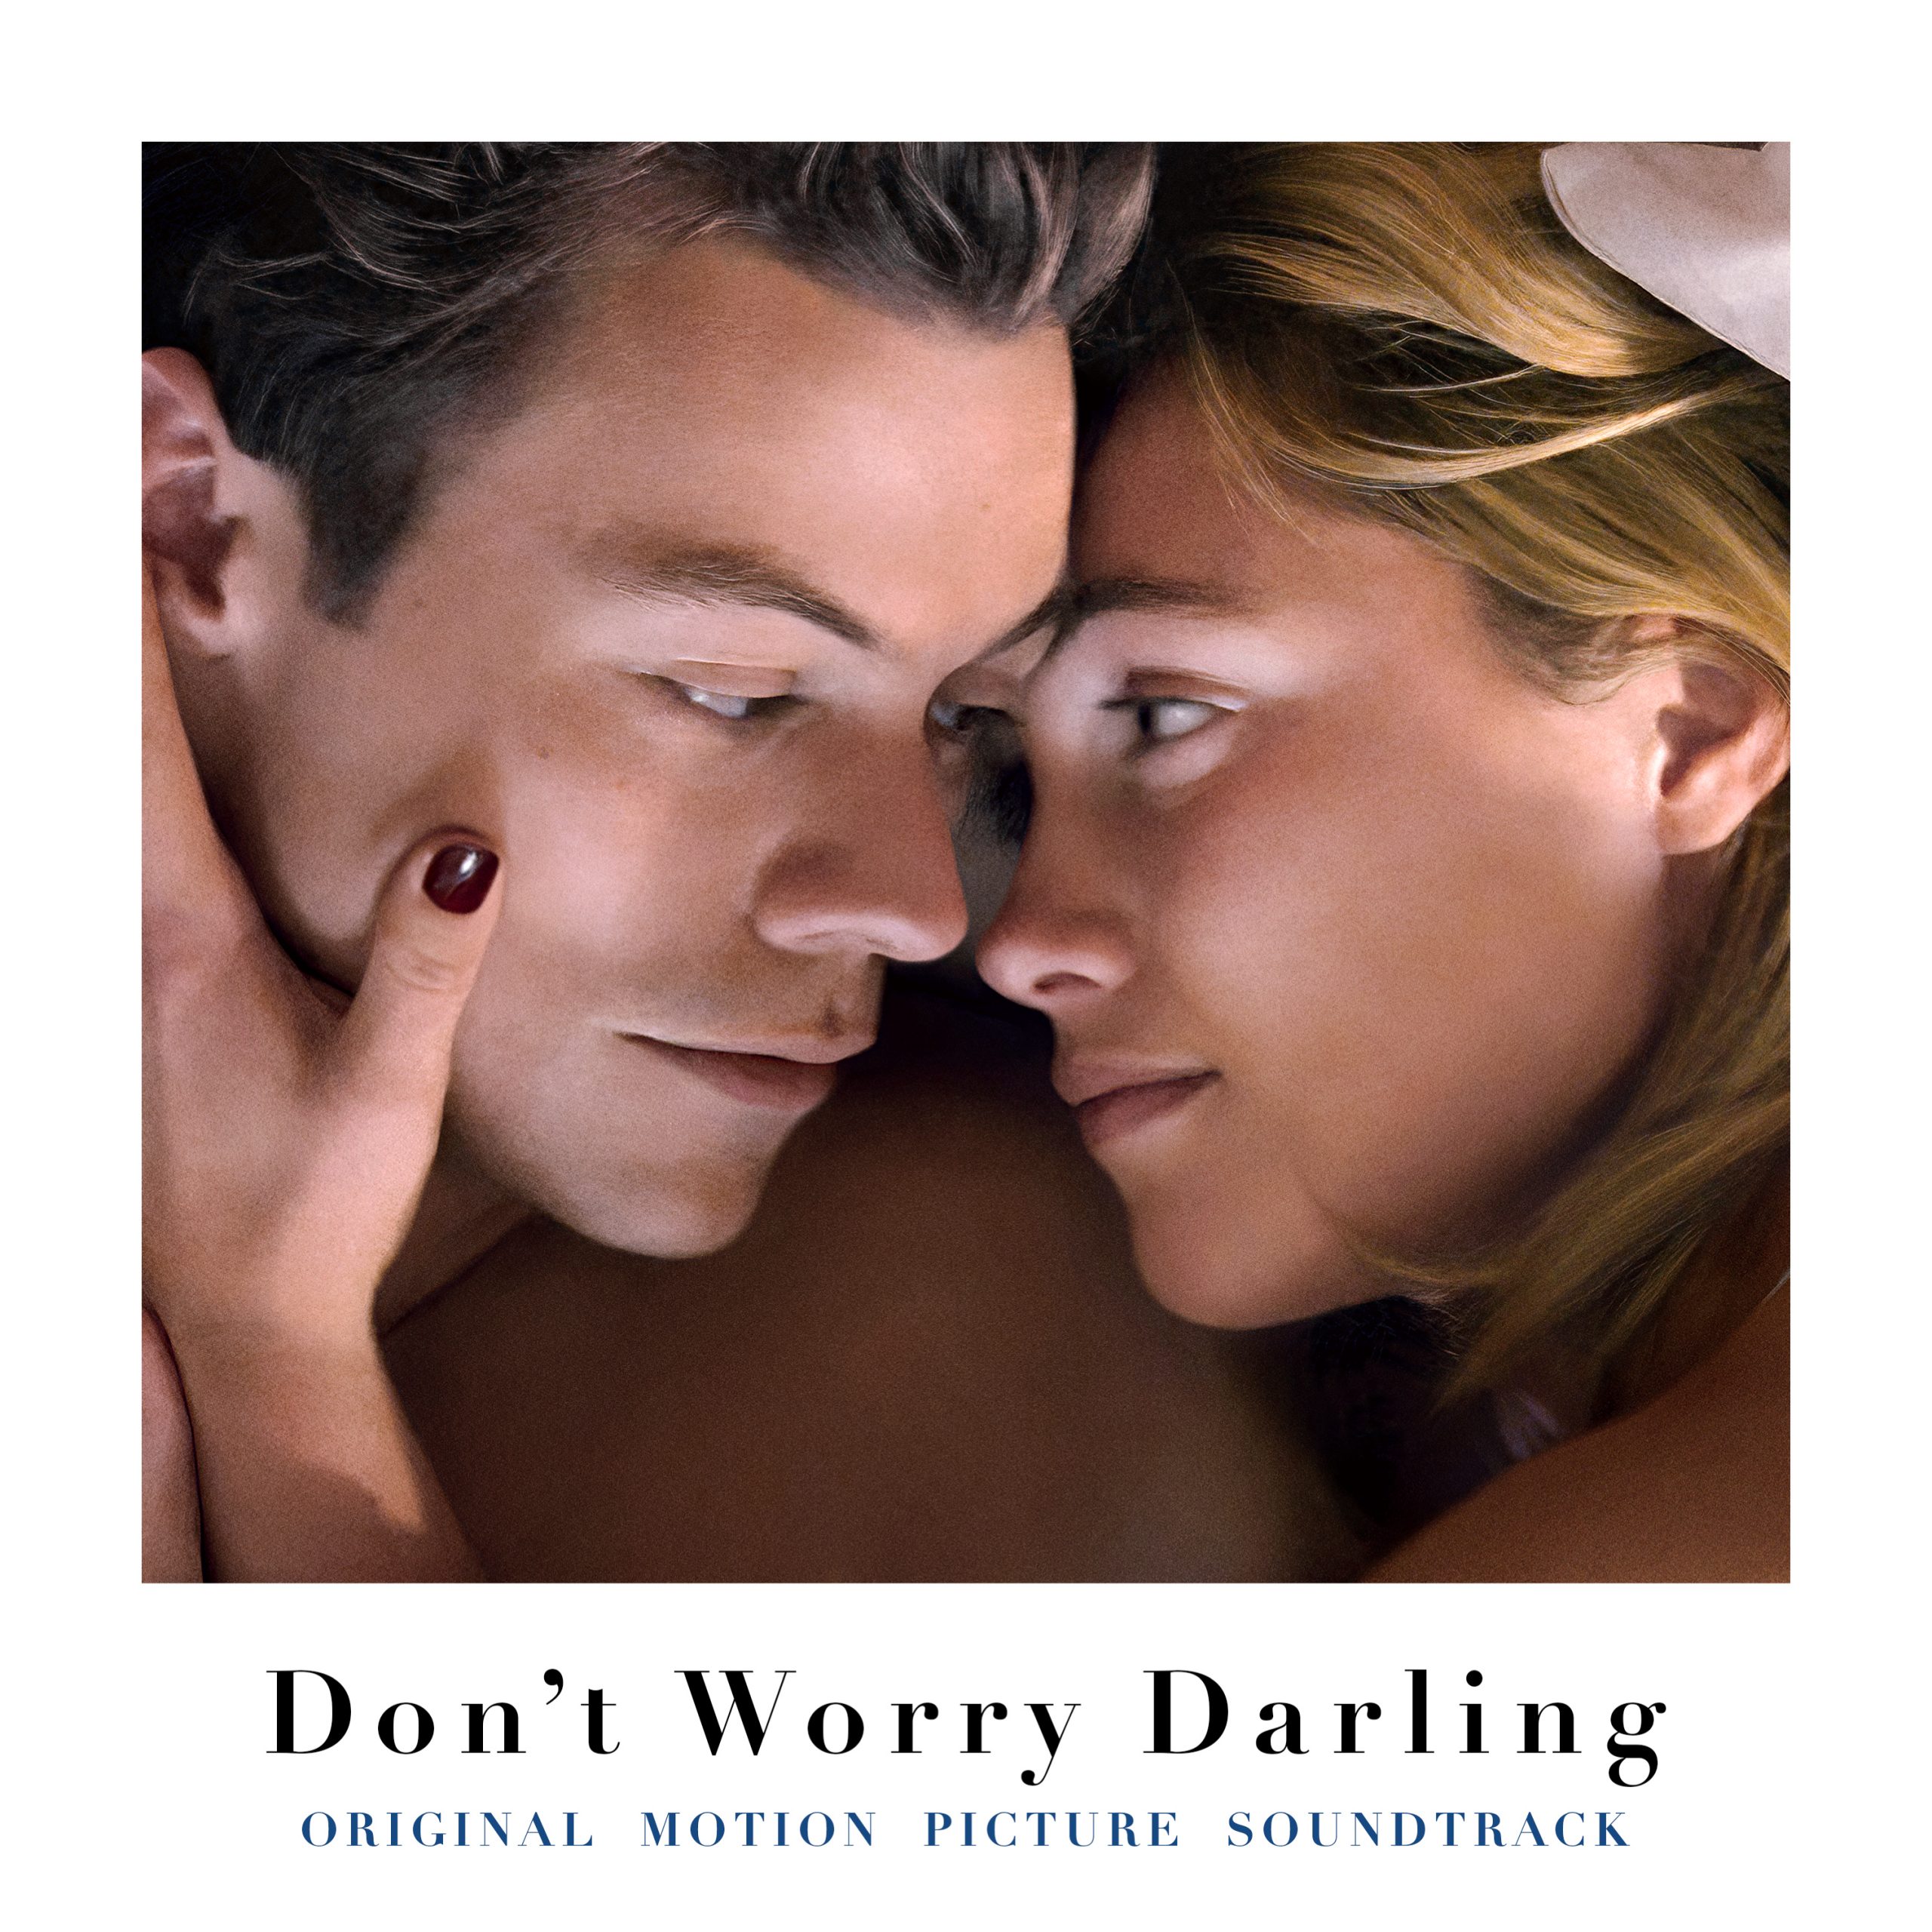 Florence Pugh And Harry Styles’ Don’t Worry Darling Song Released